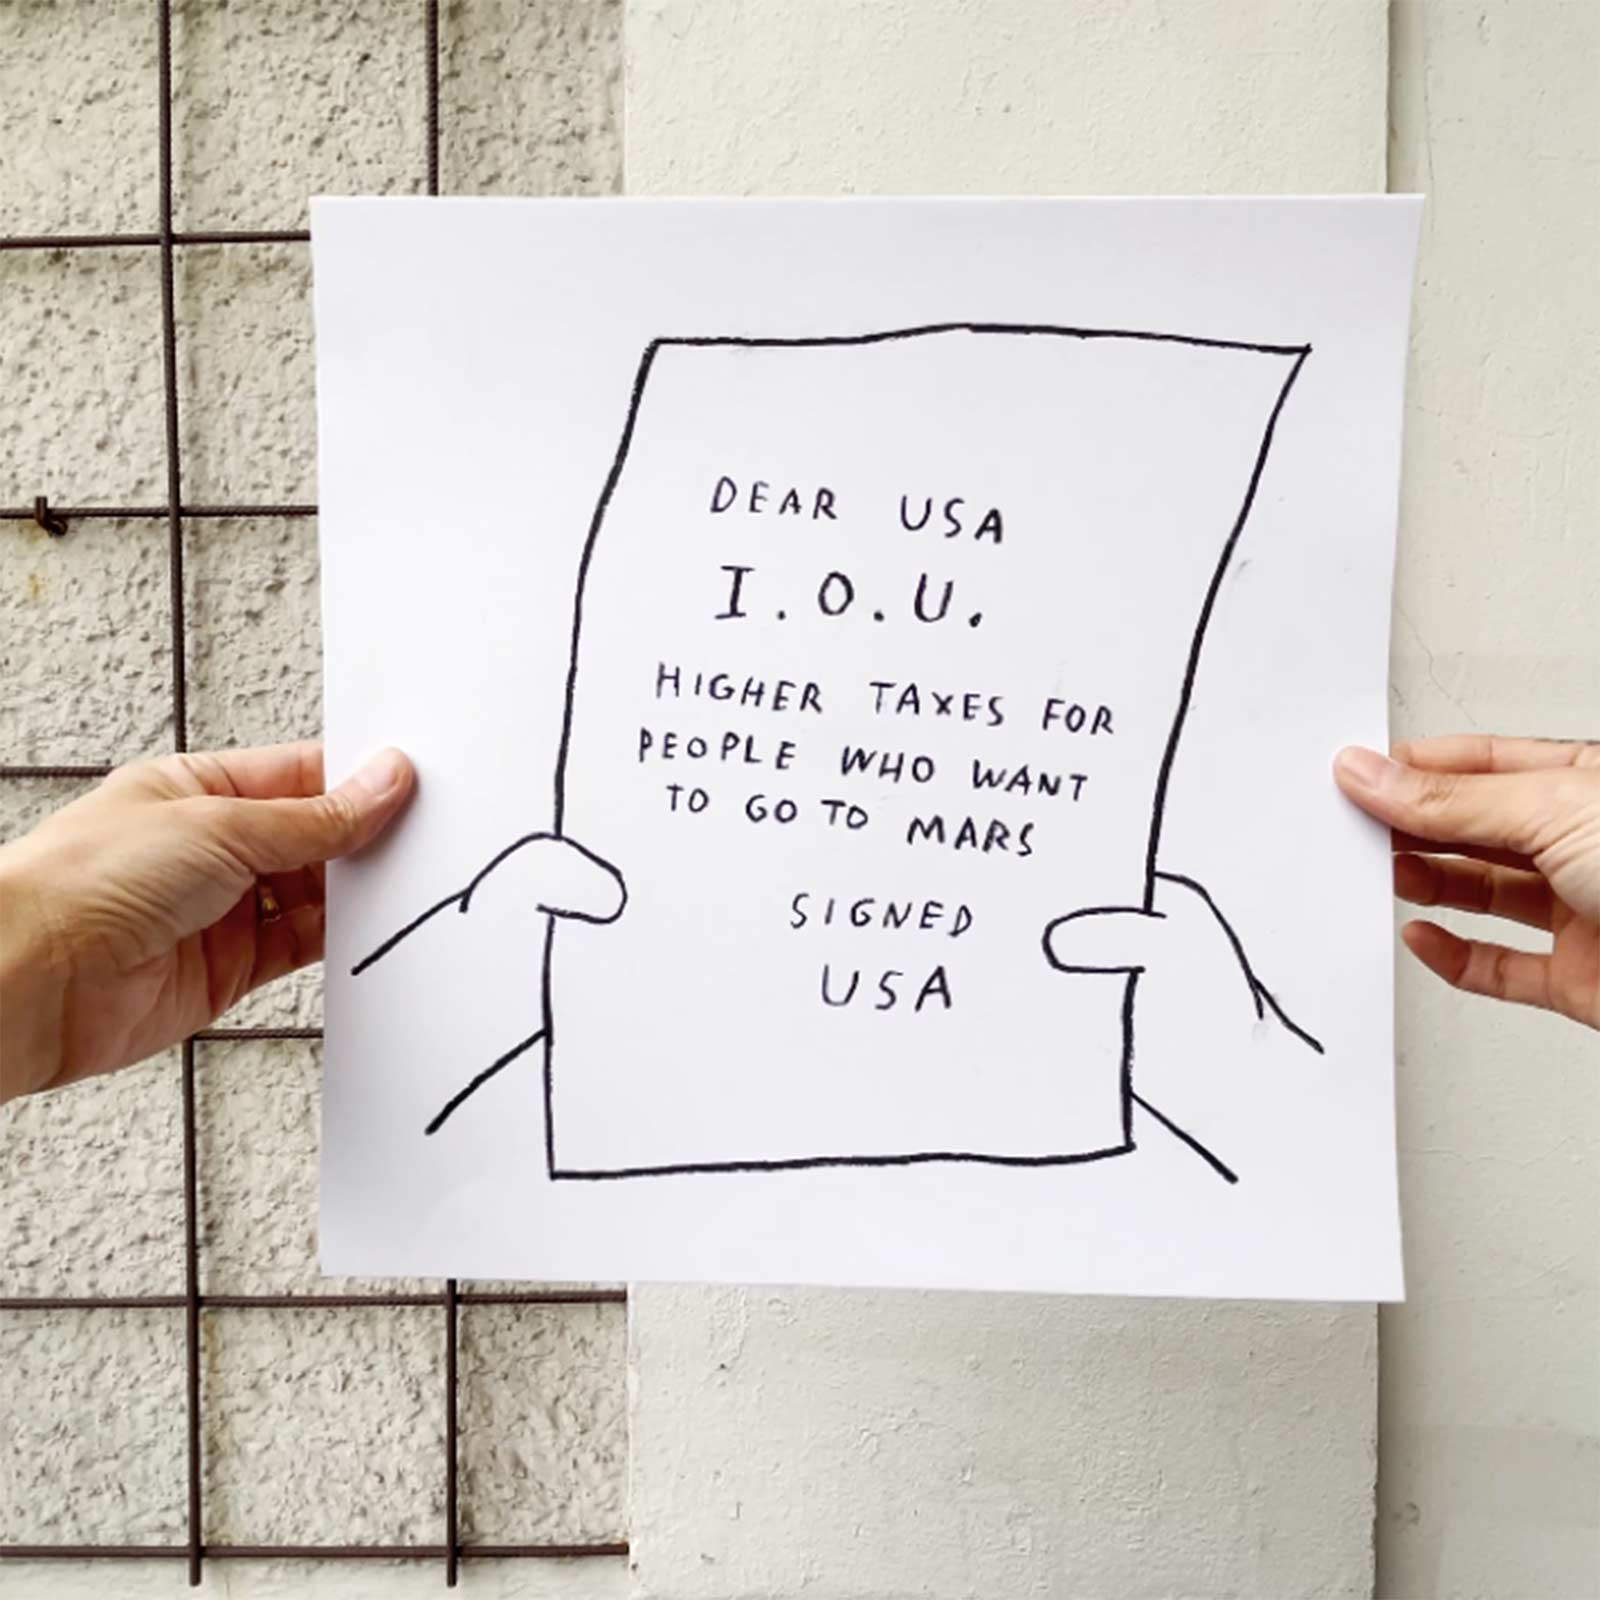 This still from IOU 4 USA depicts a square charcoal drawing held up by two hands. The drawing is of a frame from The Simpsons and shows an IOU note in Homer’s hands. The note reads: “DEAR USA I.O.U. HIGHER TAXES FOR PEOPLE WHO WANT TO GO TO MARS SIGNED USA”.